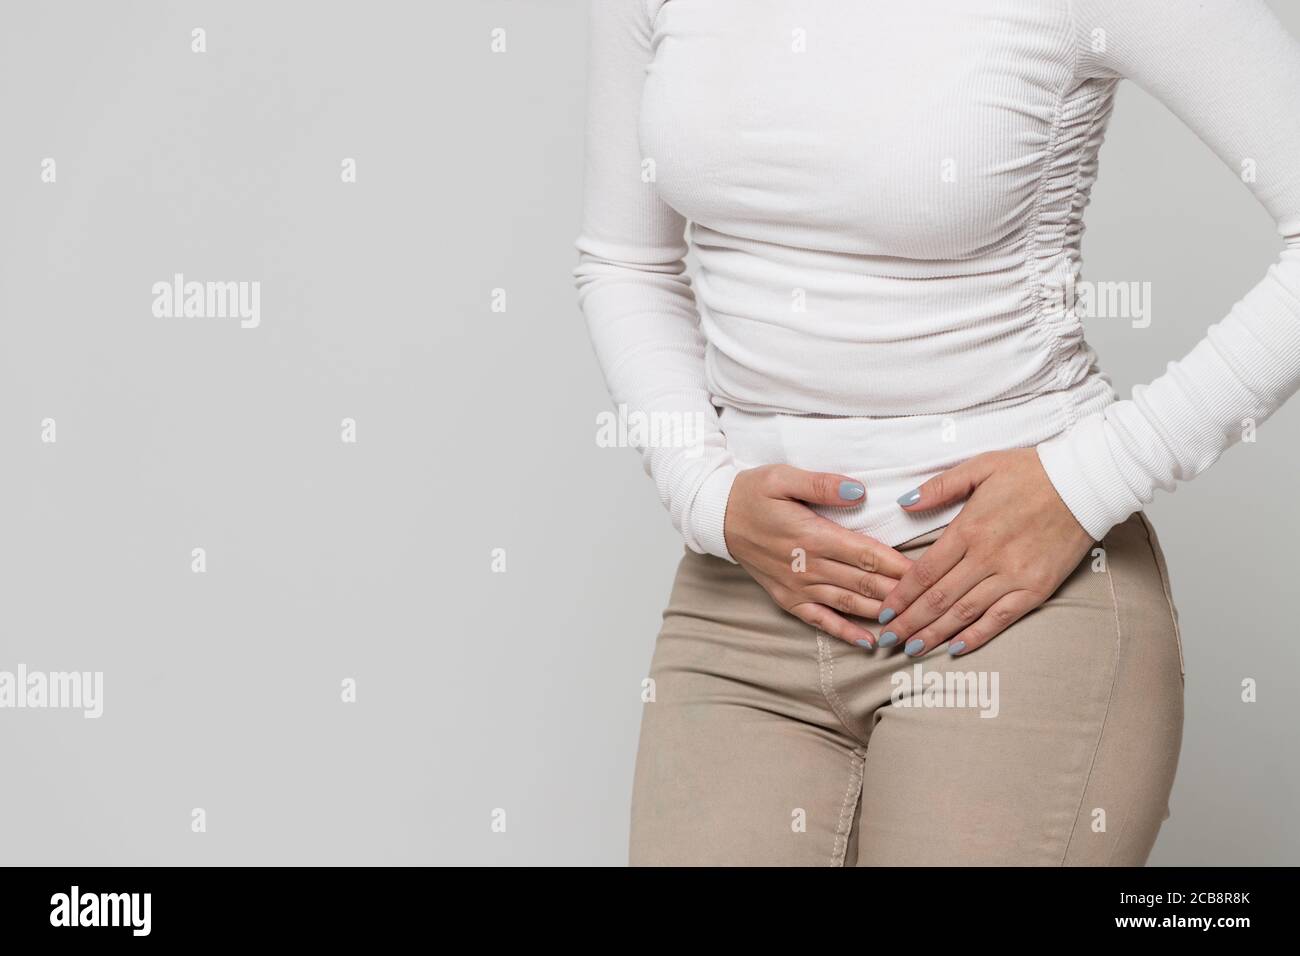 Health issues problems. Woman suffering from stomach pain, feeling abdominal pain or cramps. Period menstruation, female health problem, aching belly Stock Photo